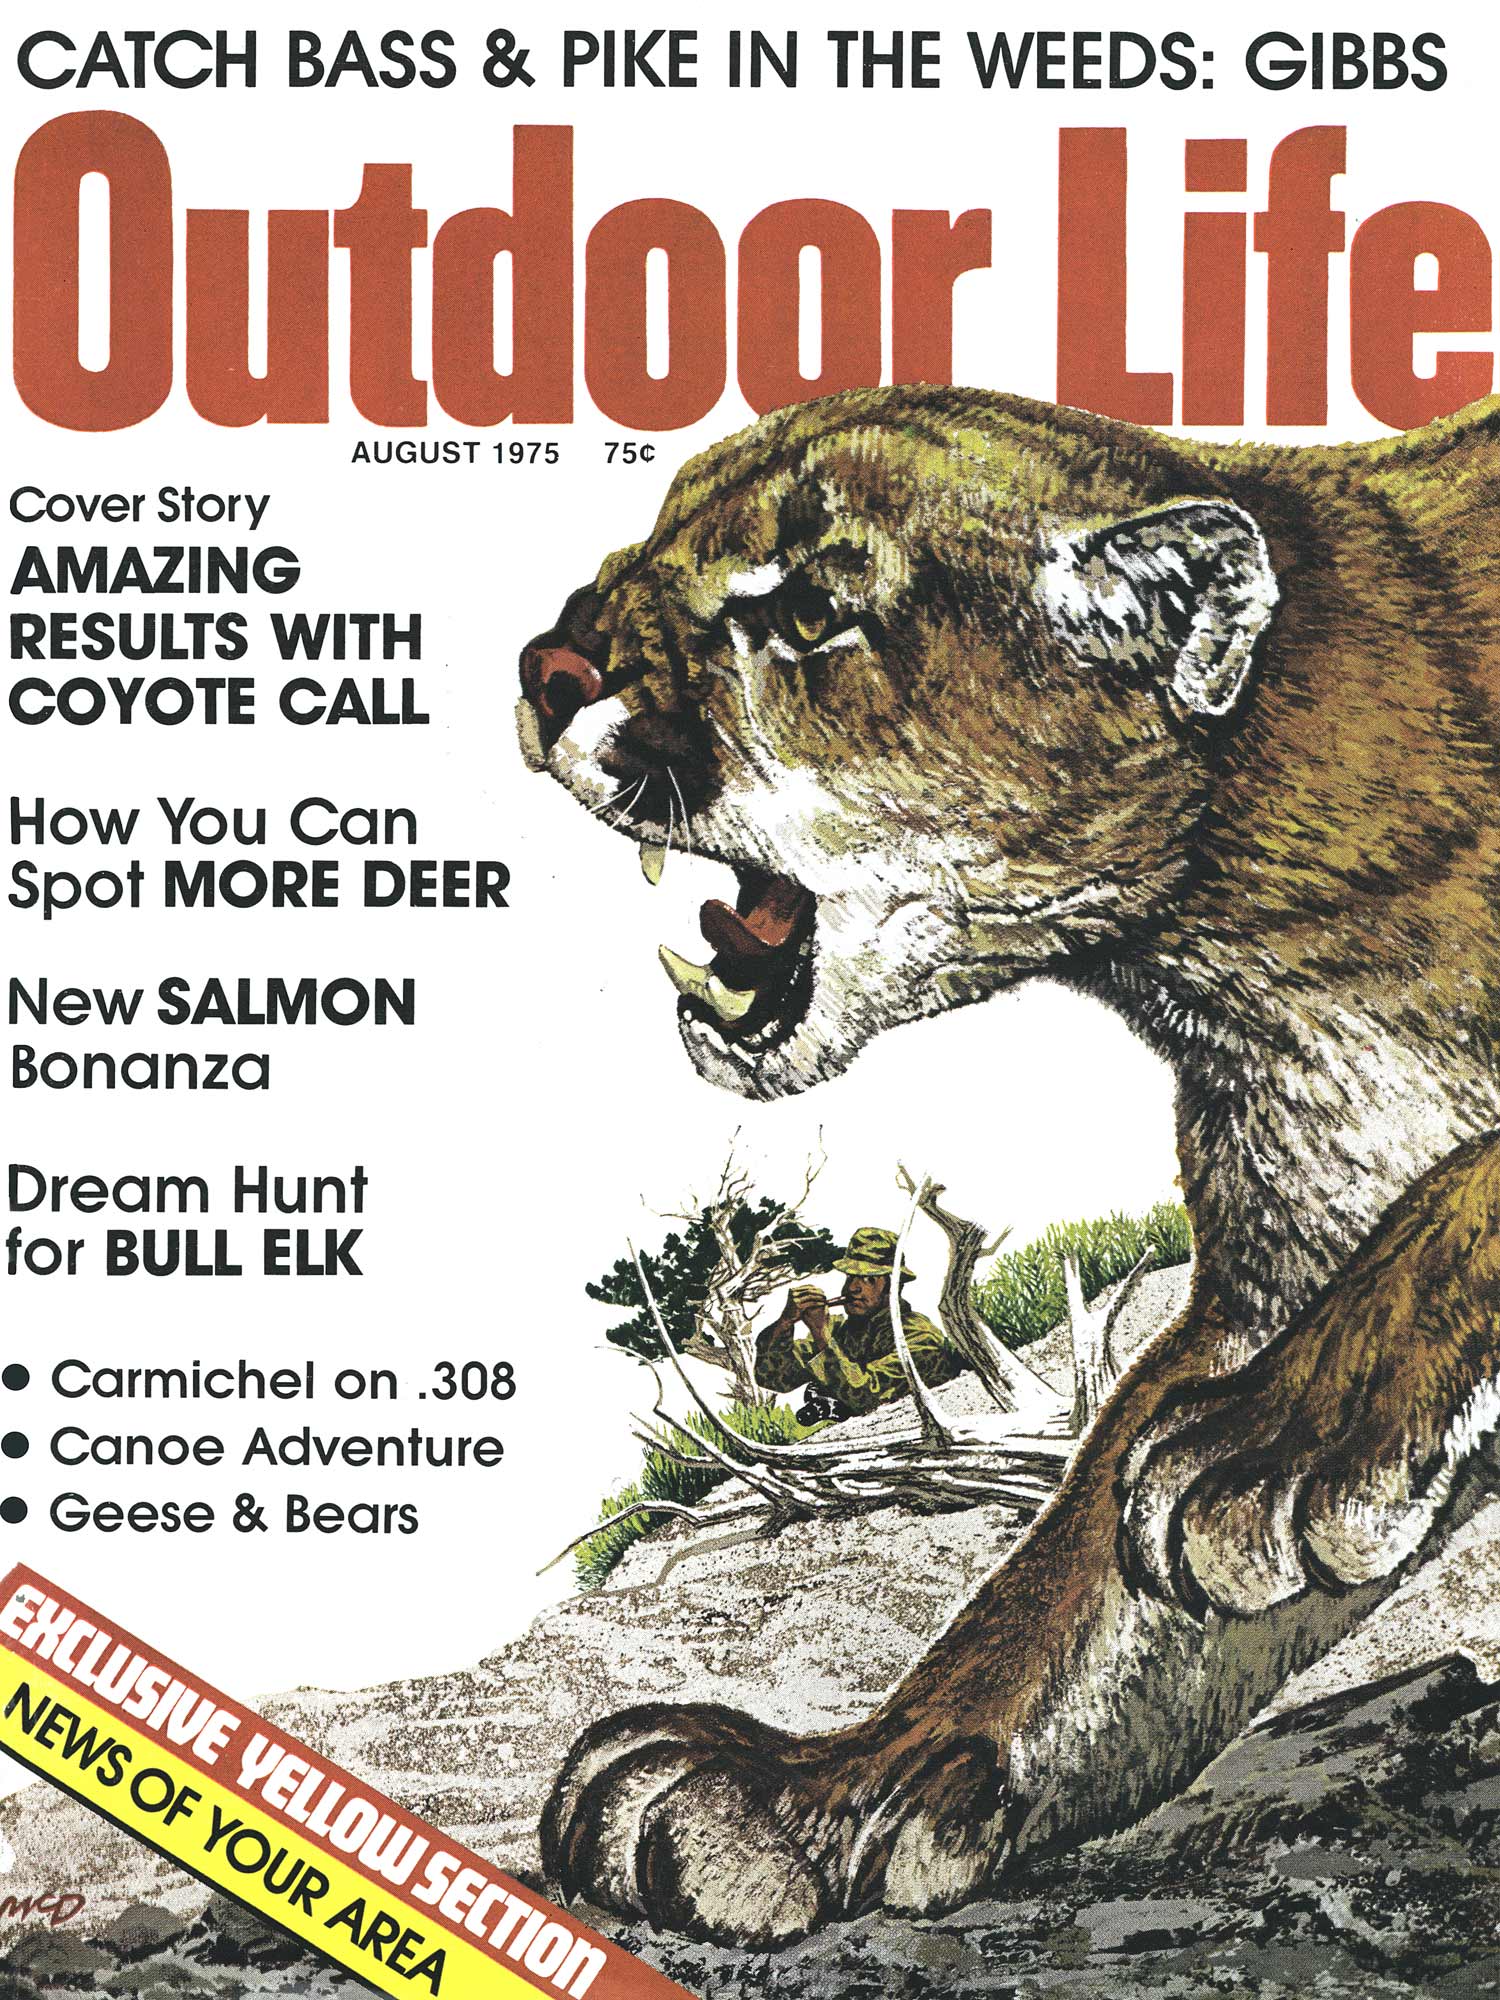 Outdoor Life August 1975 cover with mountain lion illustration